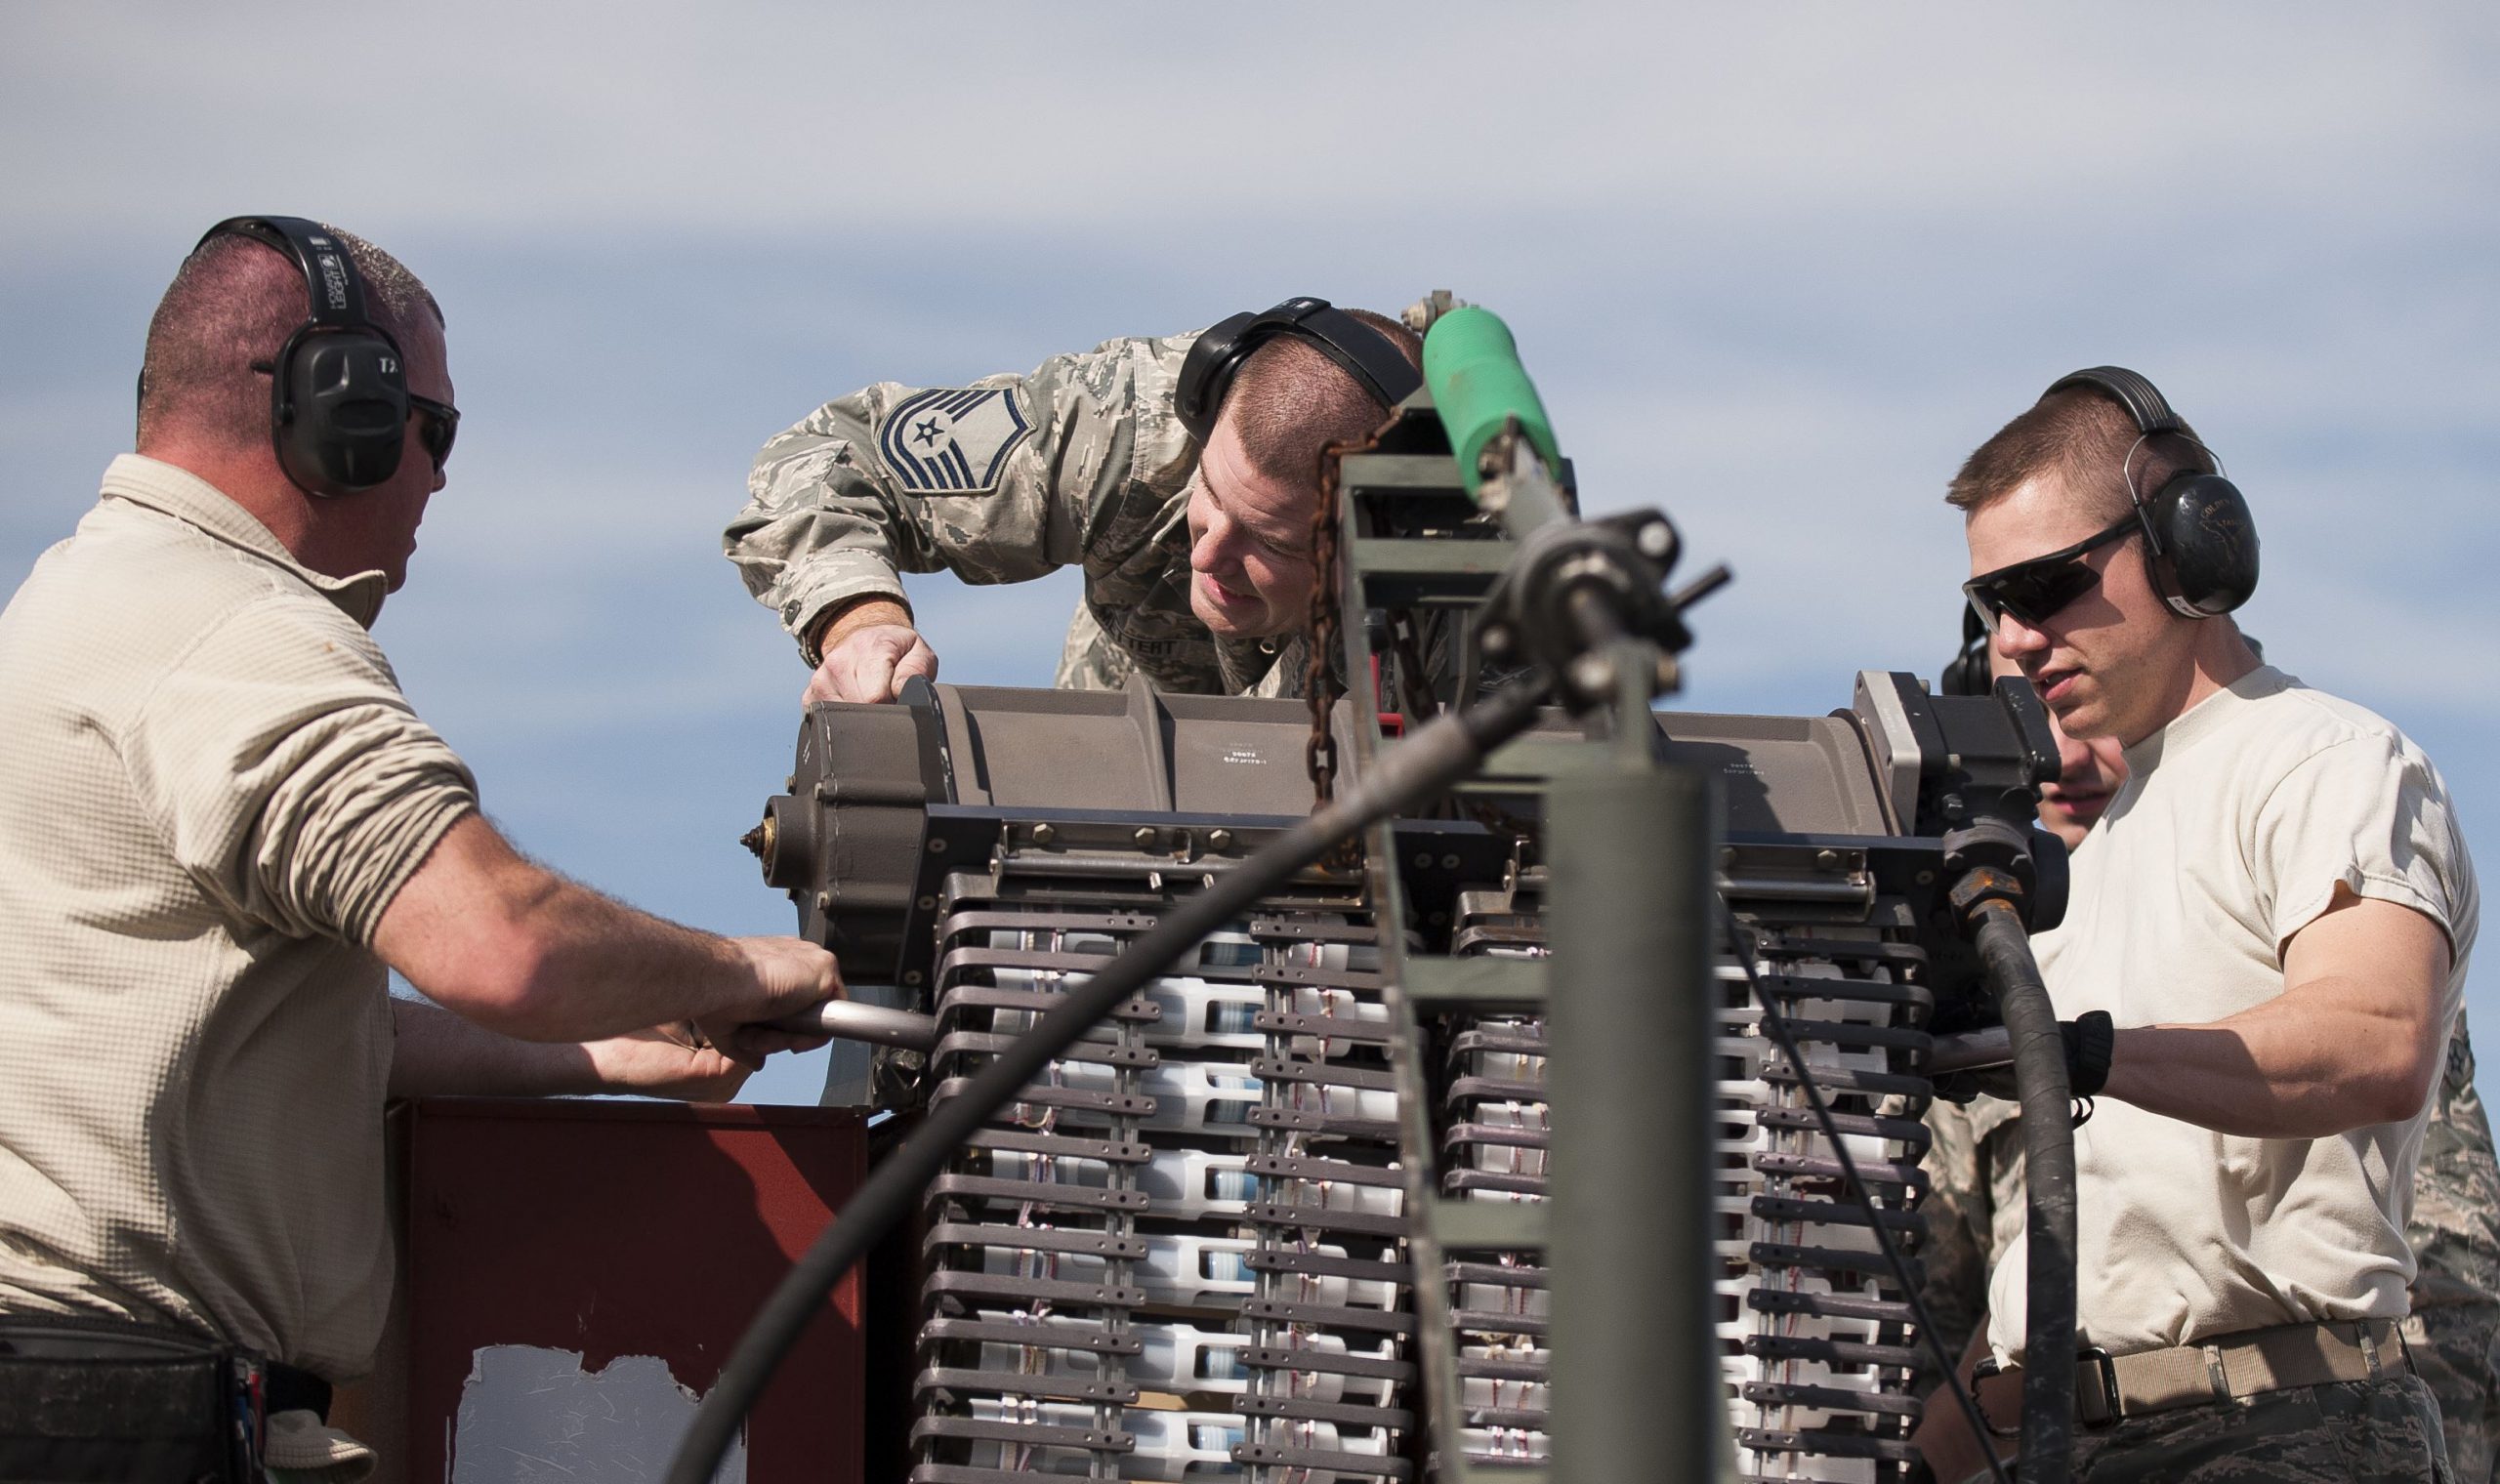 Members of the 122nd Fighter Wing load 30mm ammunition into the GAU-8 Avenger rotary cannon on an A-10C Thunderbolt II aircraft during Operation Guardian Blitz, Jan. 25, 2018, at MacDill Air Force Base, Fla. Guardian Blitz is a two-week joint exercise to improve service interoperability for combat search and rescue and close air support. U.S. Air National Guard photo by Staff Sgt. William Hopper. -